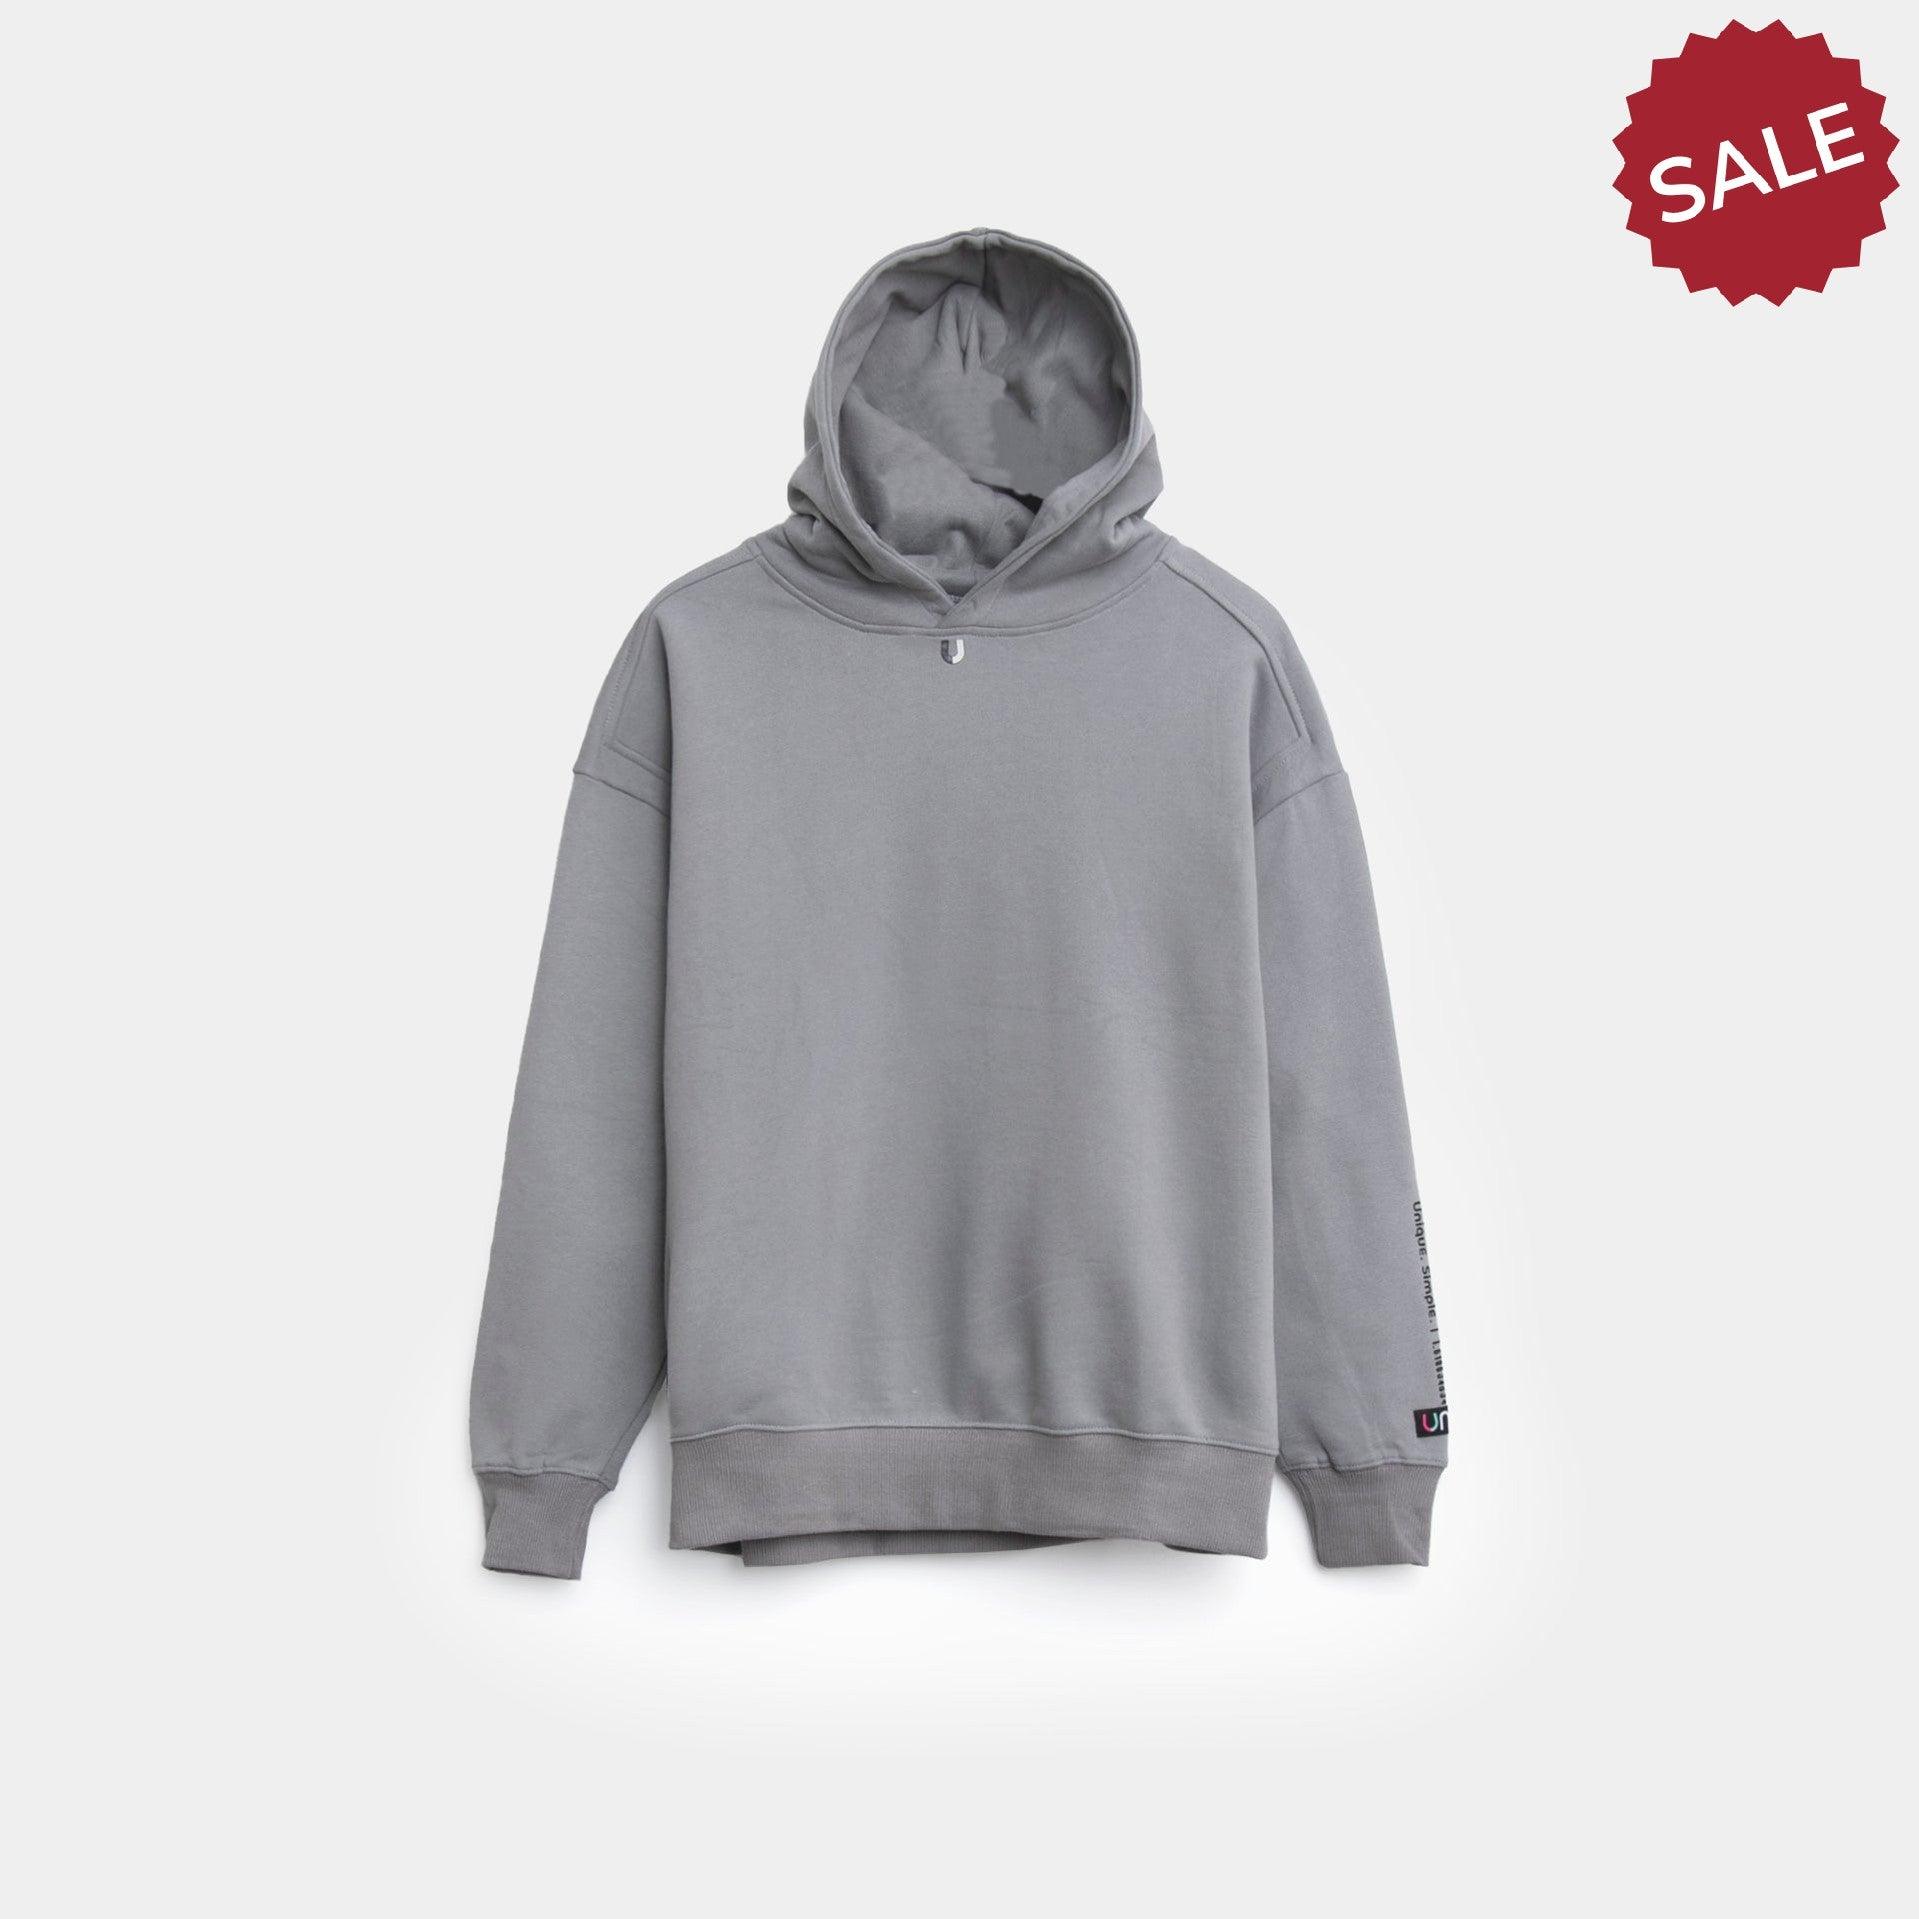 Gray Oversize Hoodie From Unisi - WECRE8